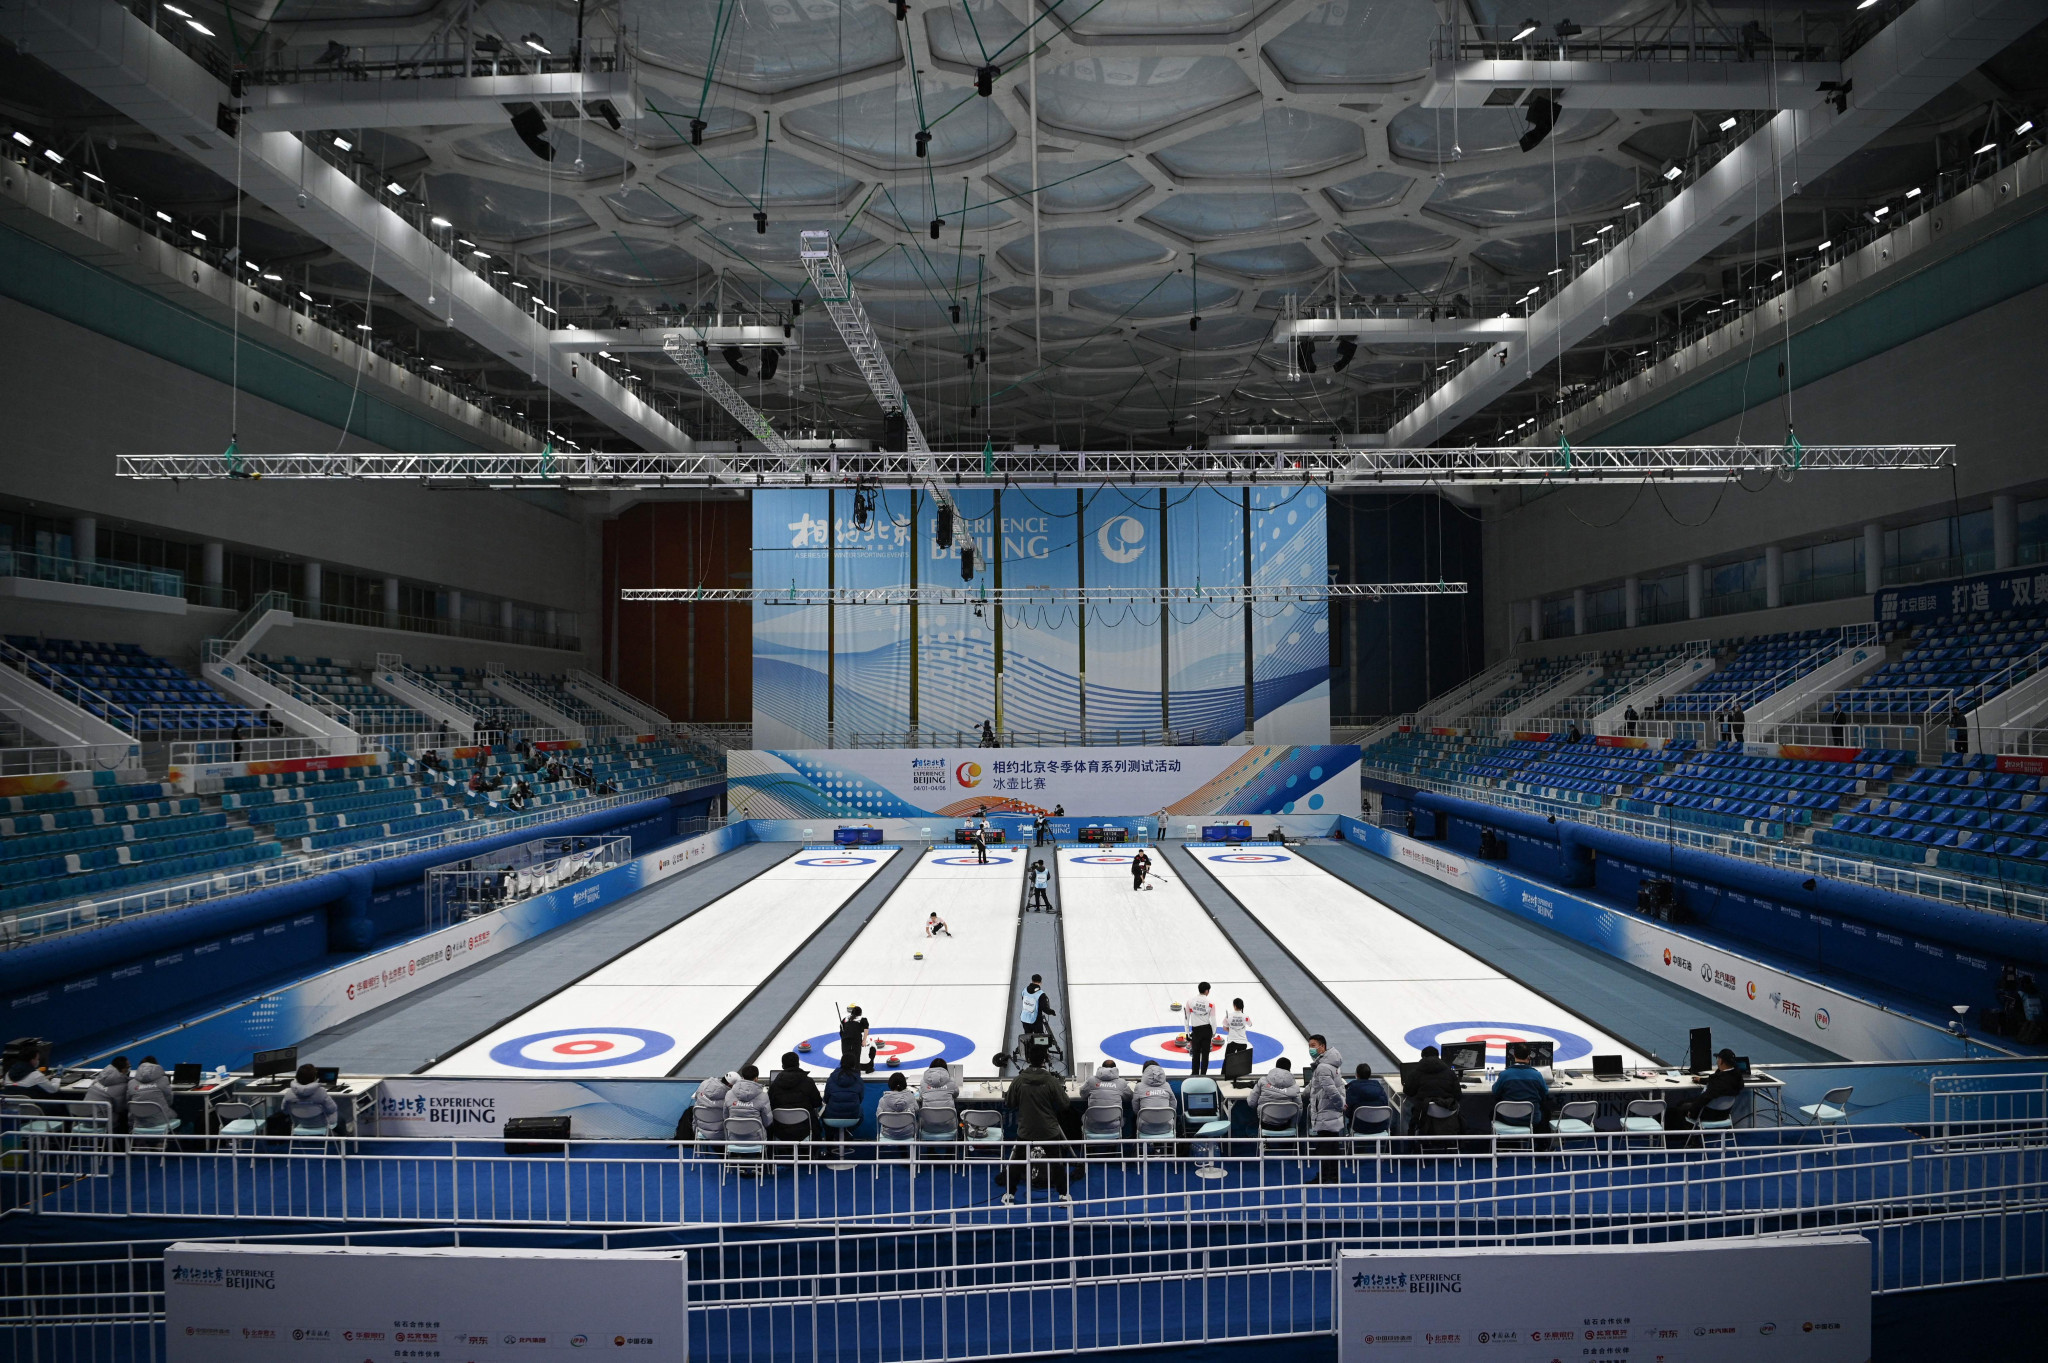 Beijing 2022 Ice Cube venue to be open to public for a month